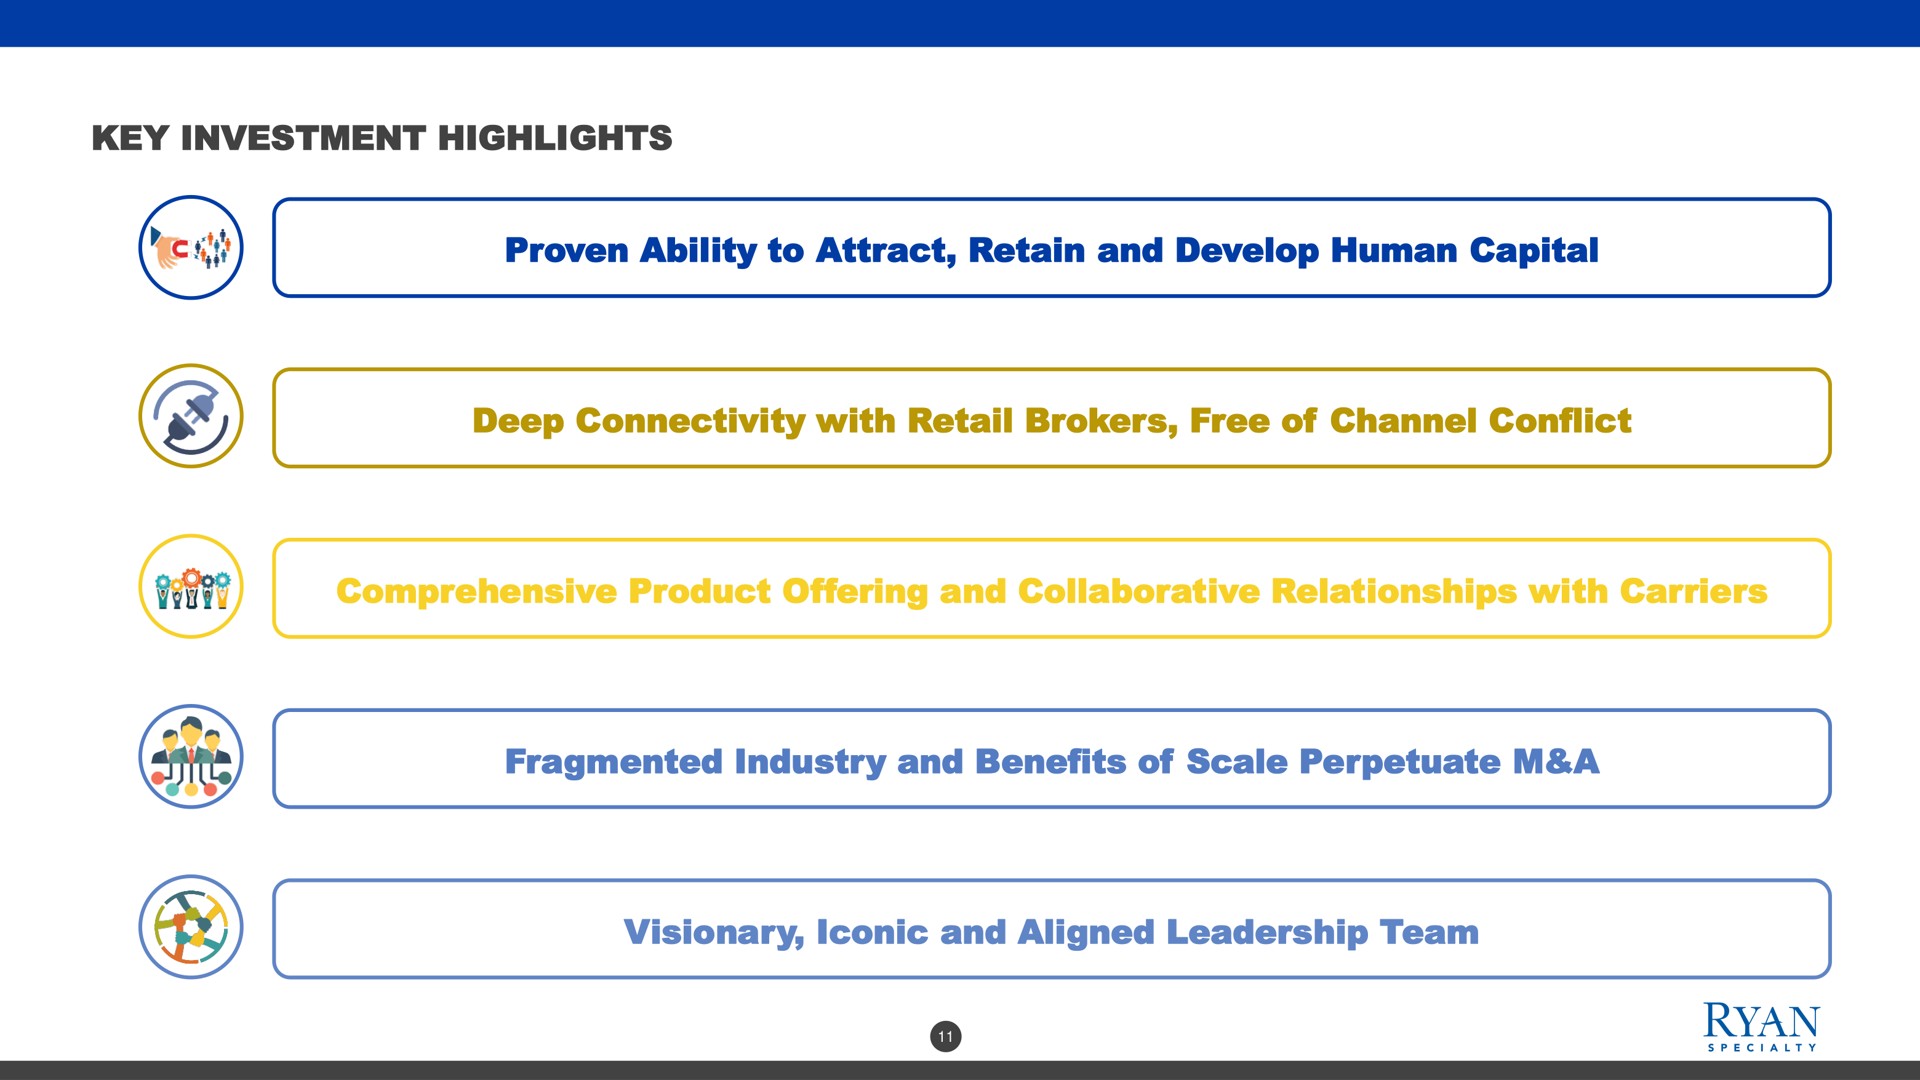 key investment highlights proven ability to attract retain and develop human capital deep connectivity with retail brokers free of channel conflict comprehensive product offering and collaborative relationships with carriers fragmented industry and benefits of scale perpetuate a visionary iconic and aligned leadership team | Rayan Speciality Group